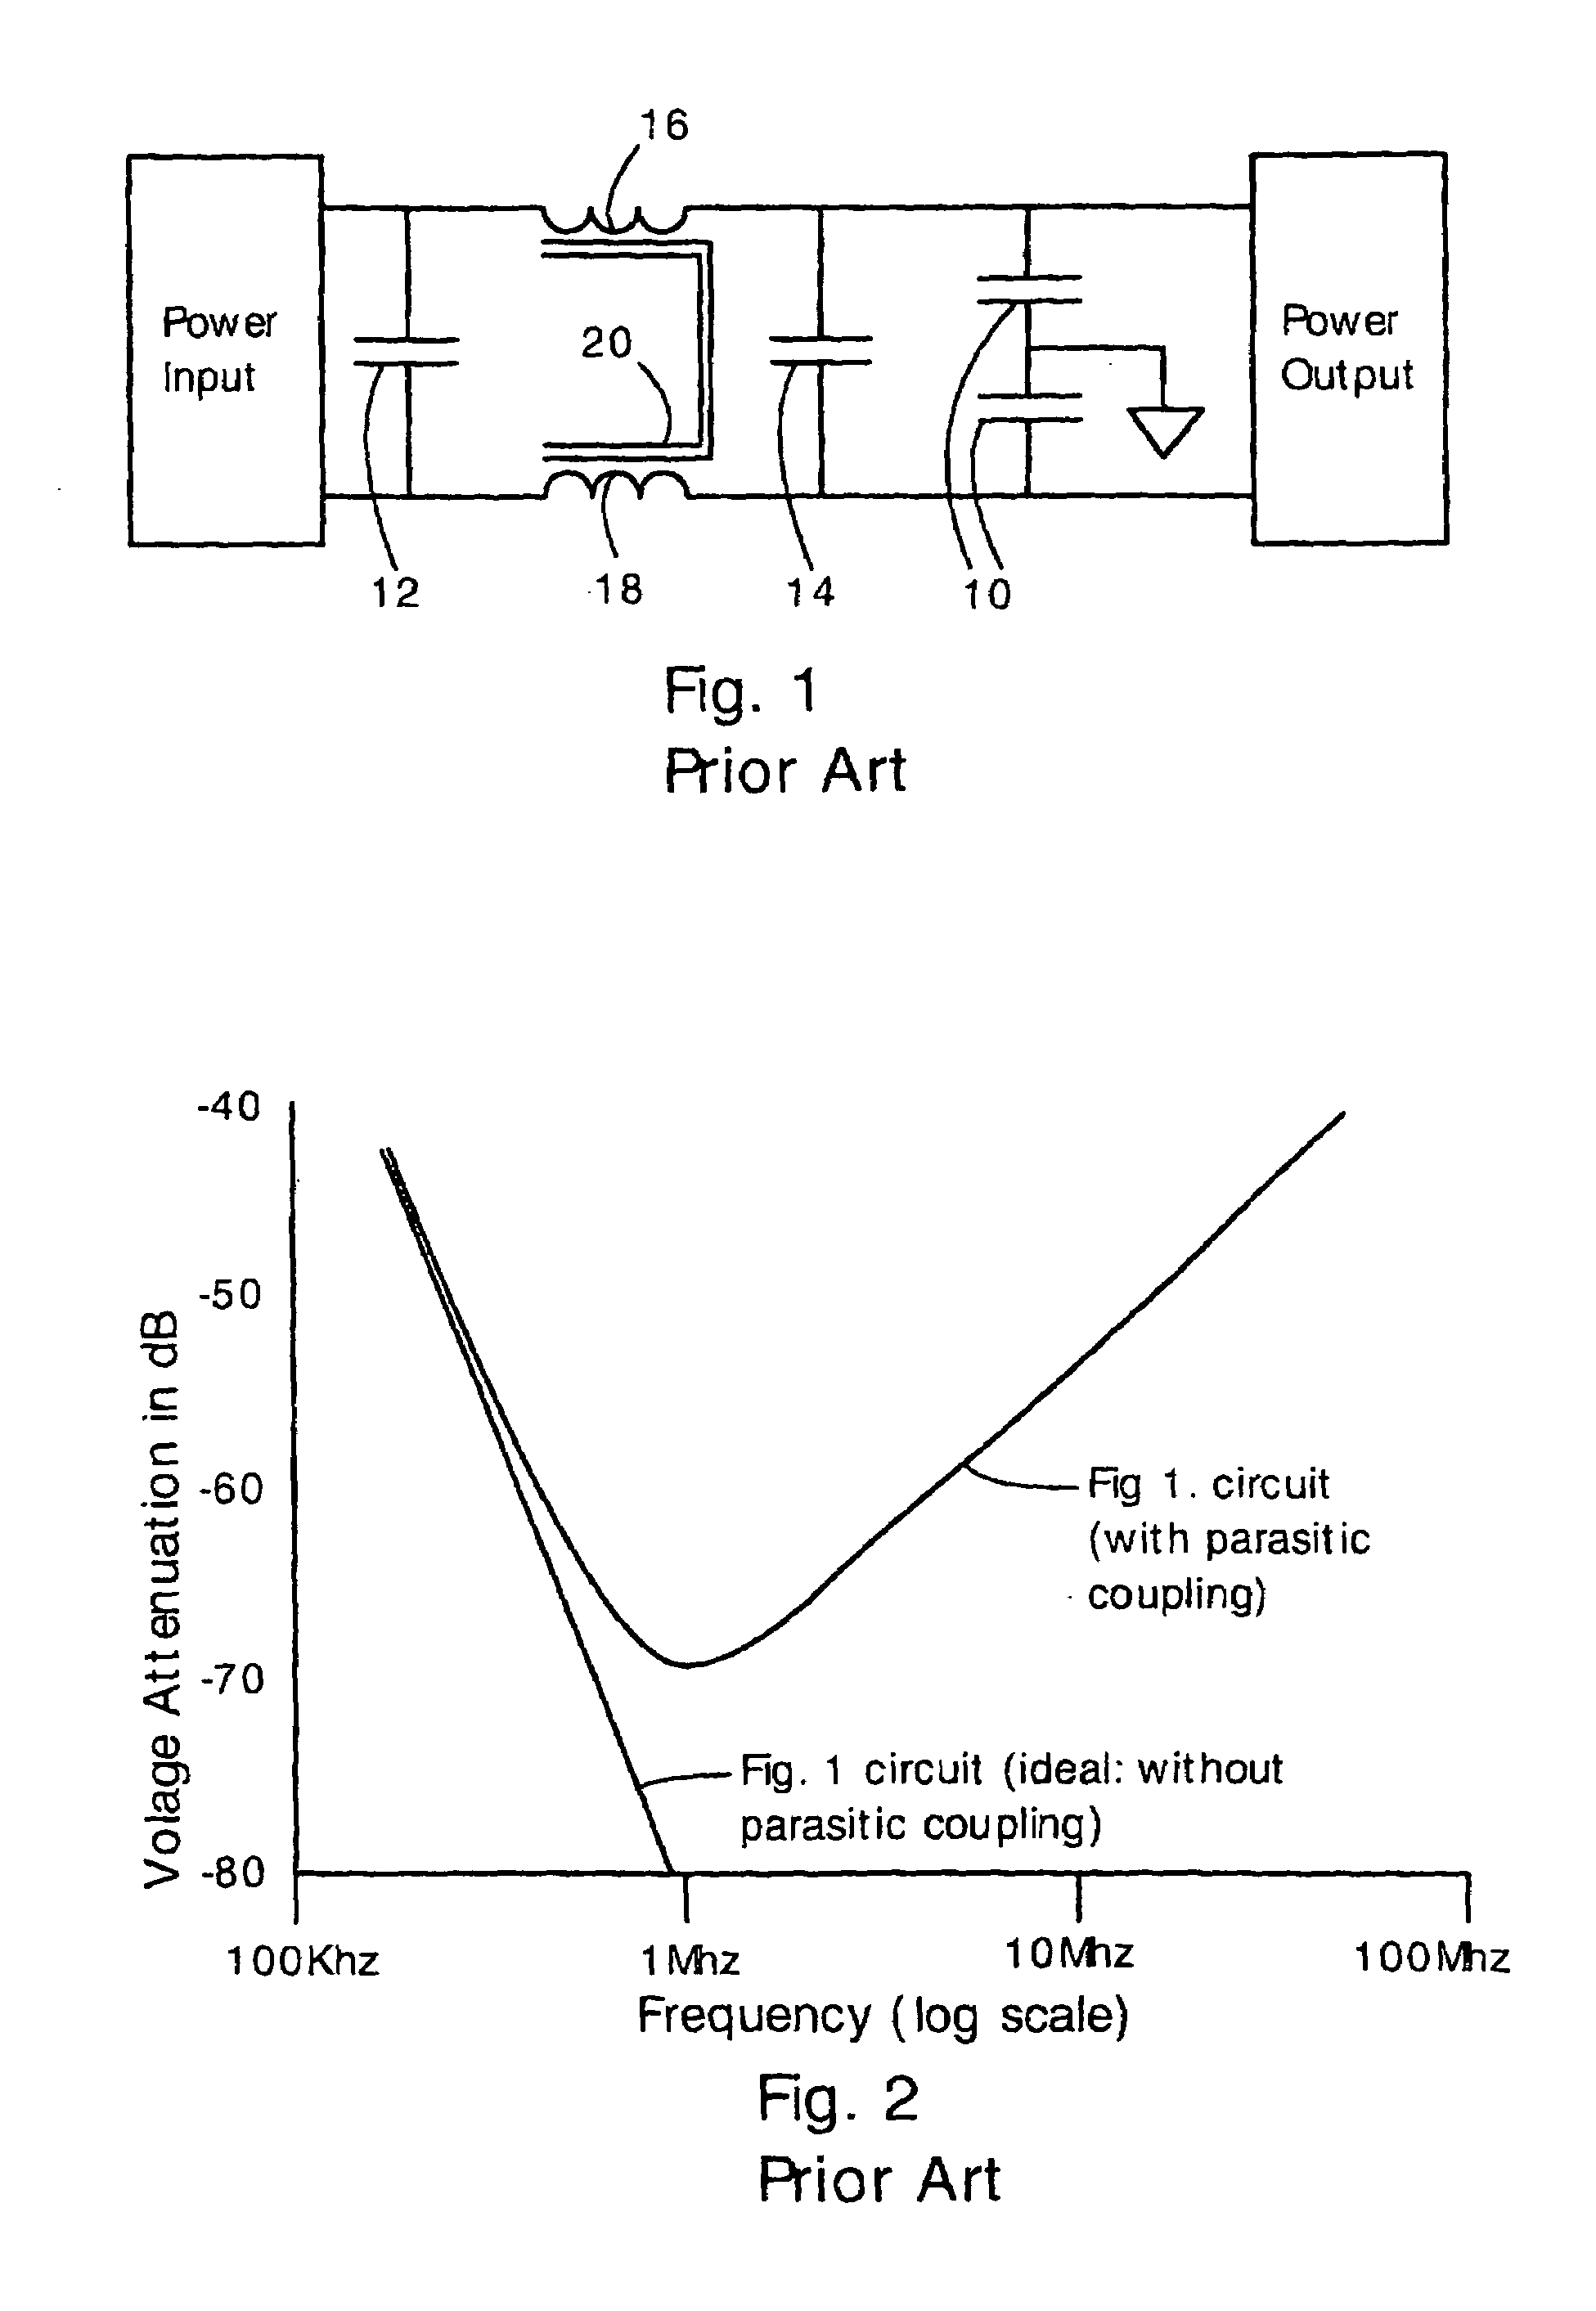 EMI filter and frequency filters having capacitor with inductance cancellation loop